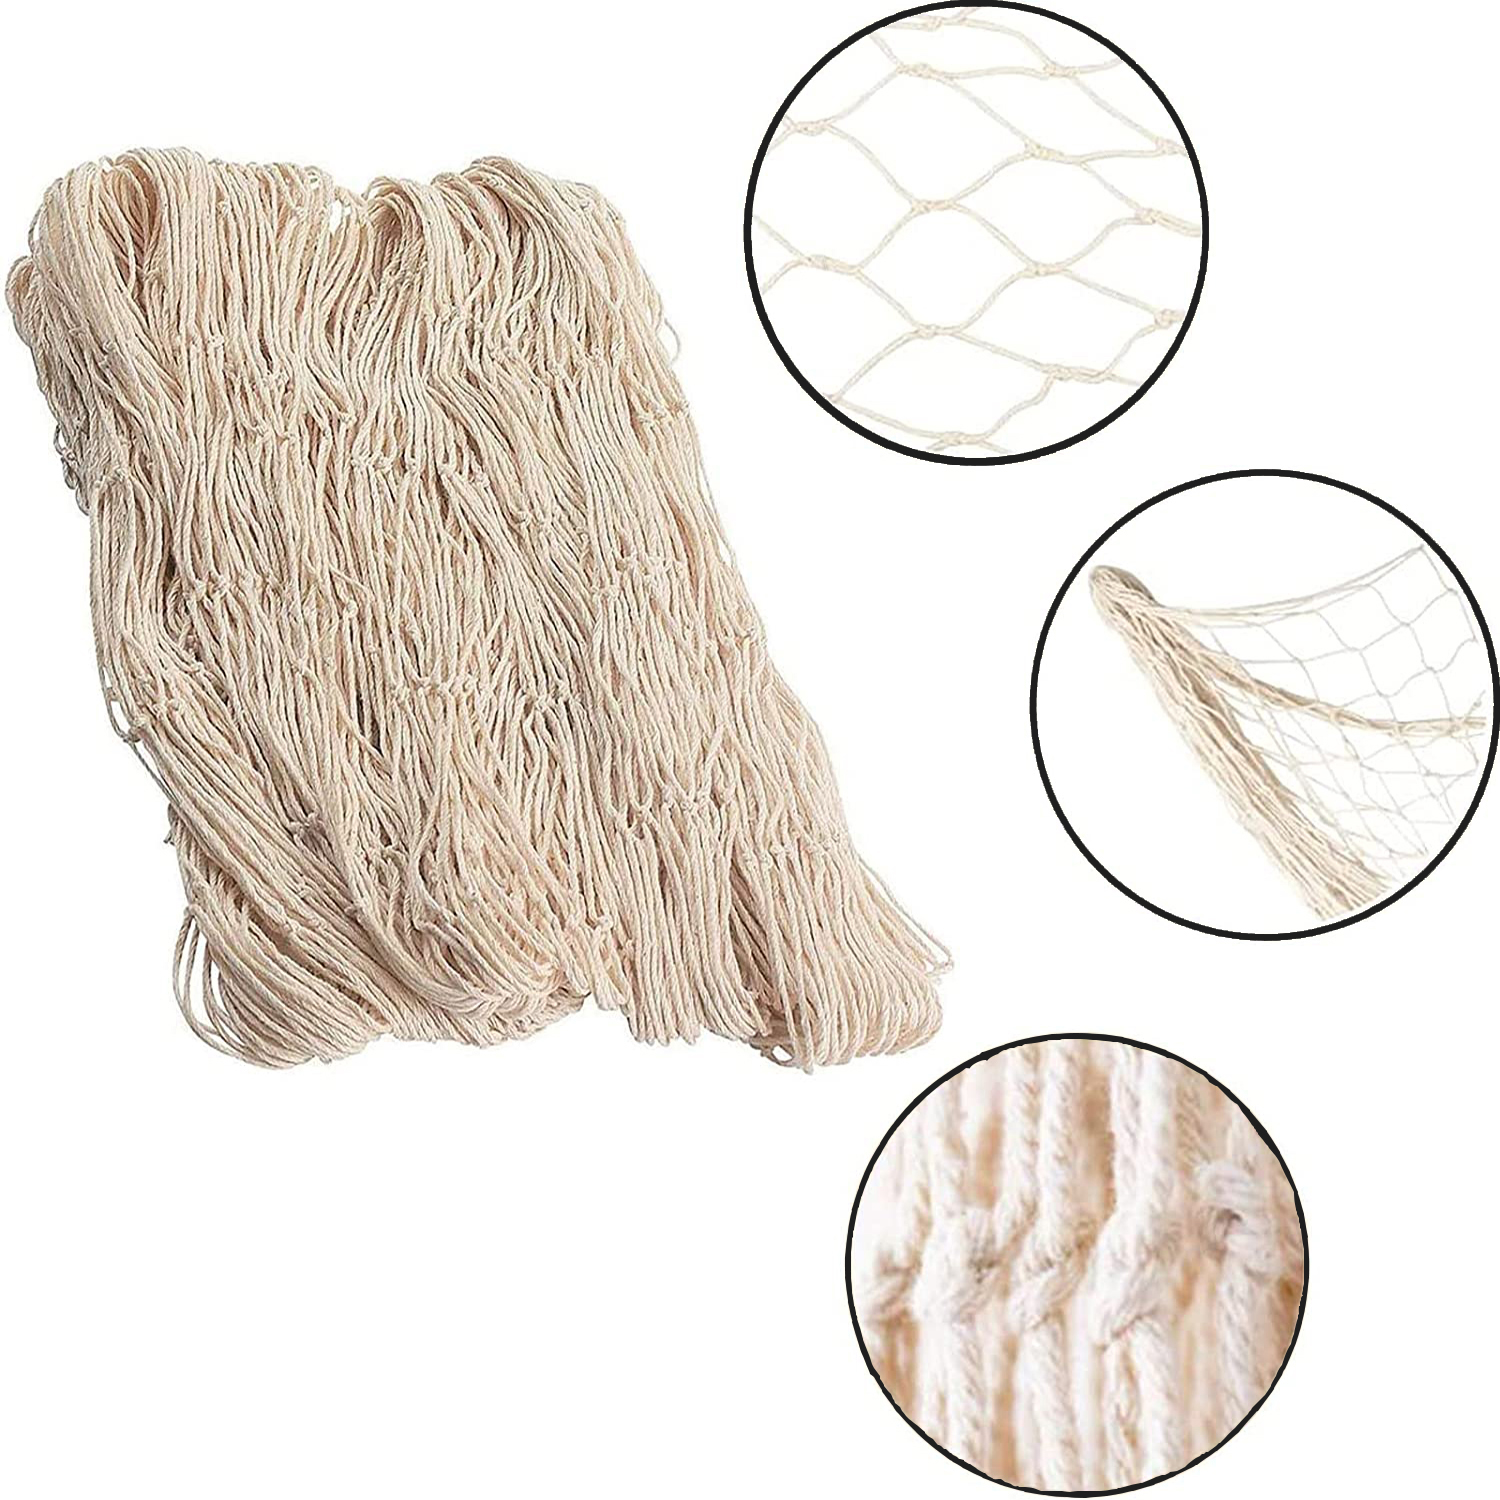 Natural Fish Net Decorative, Beach Themed Fish Net Decorations for Pirate,  Merma